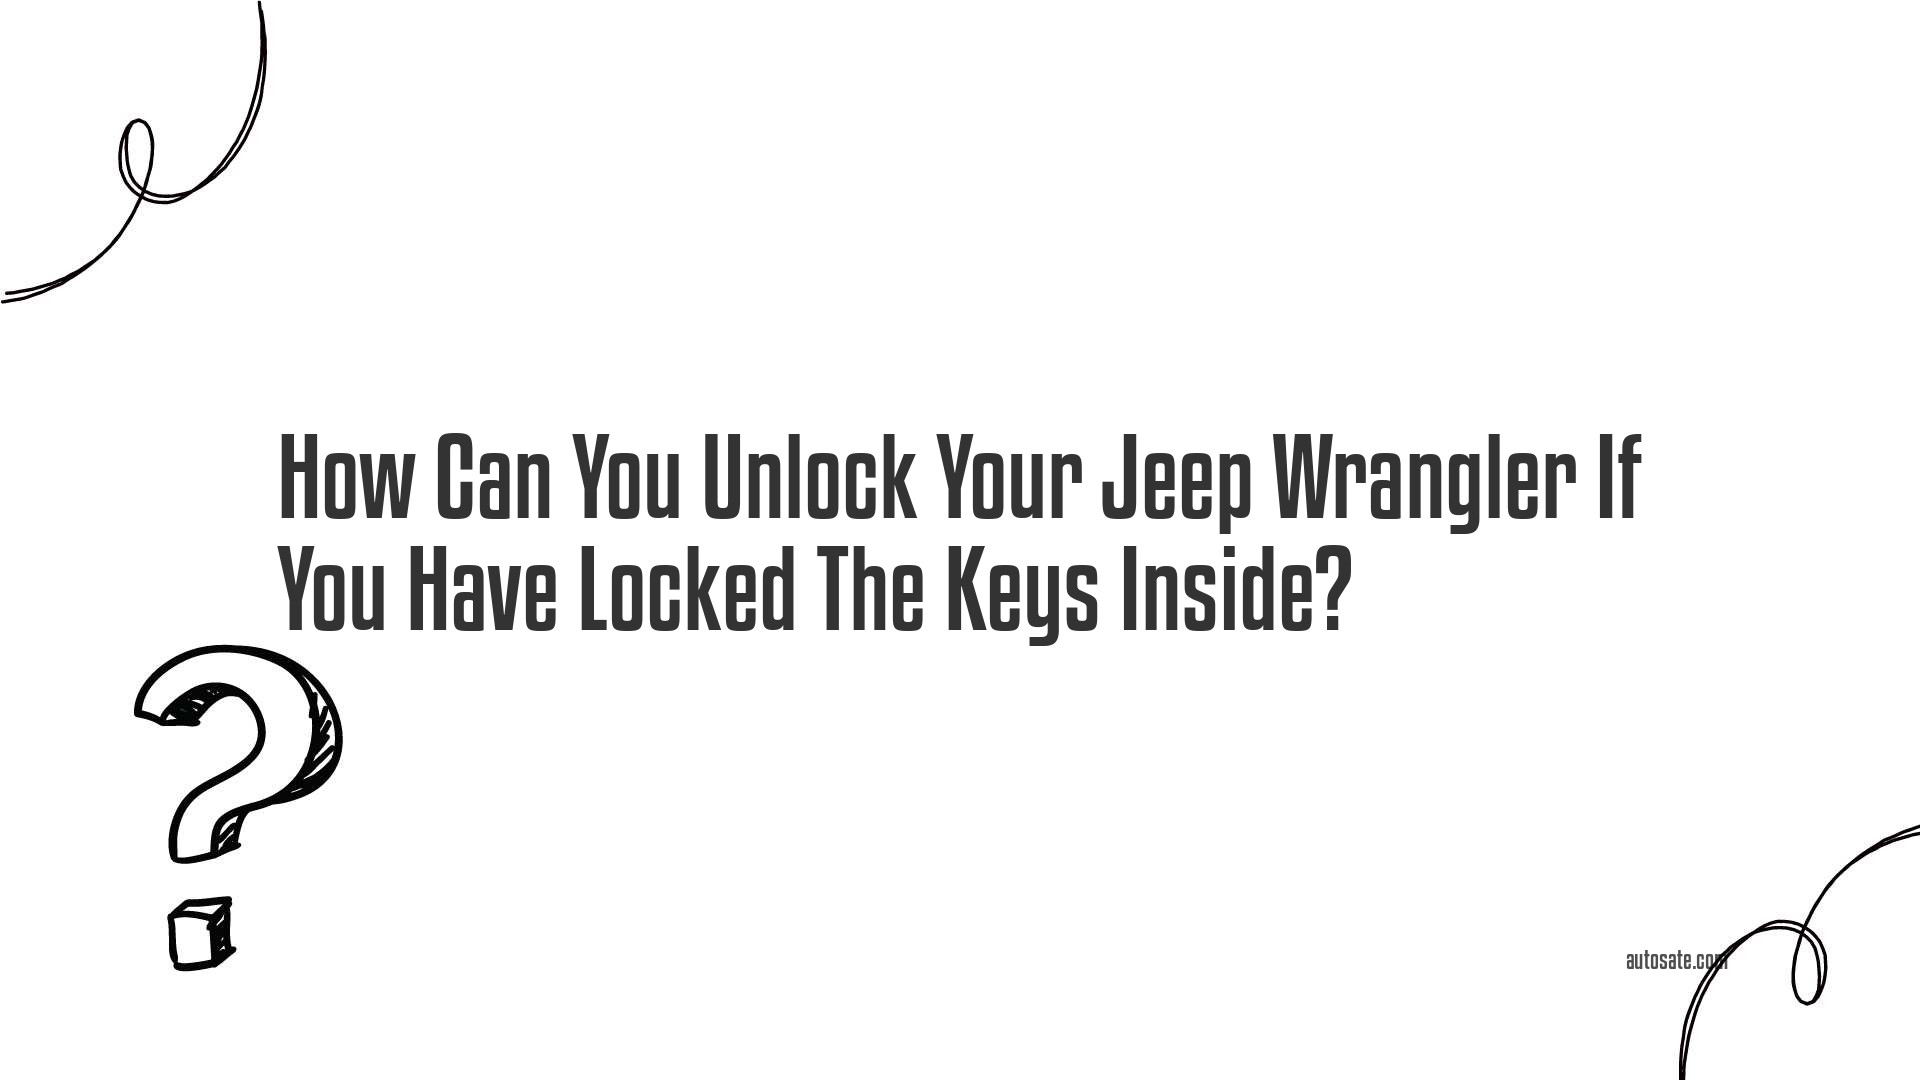 How Can You Unlock Your Jeep Wrangler If You Have Locked The Keys Inside?